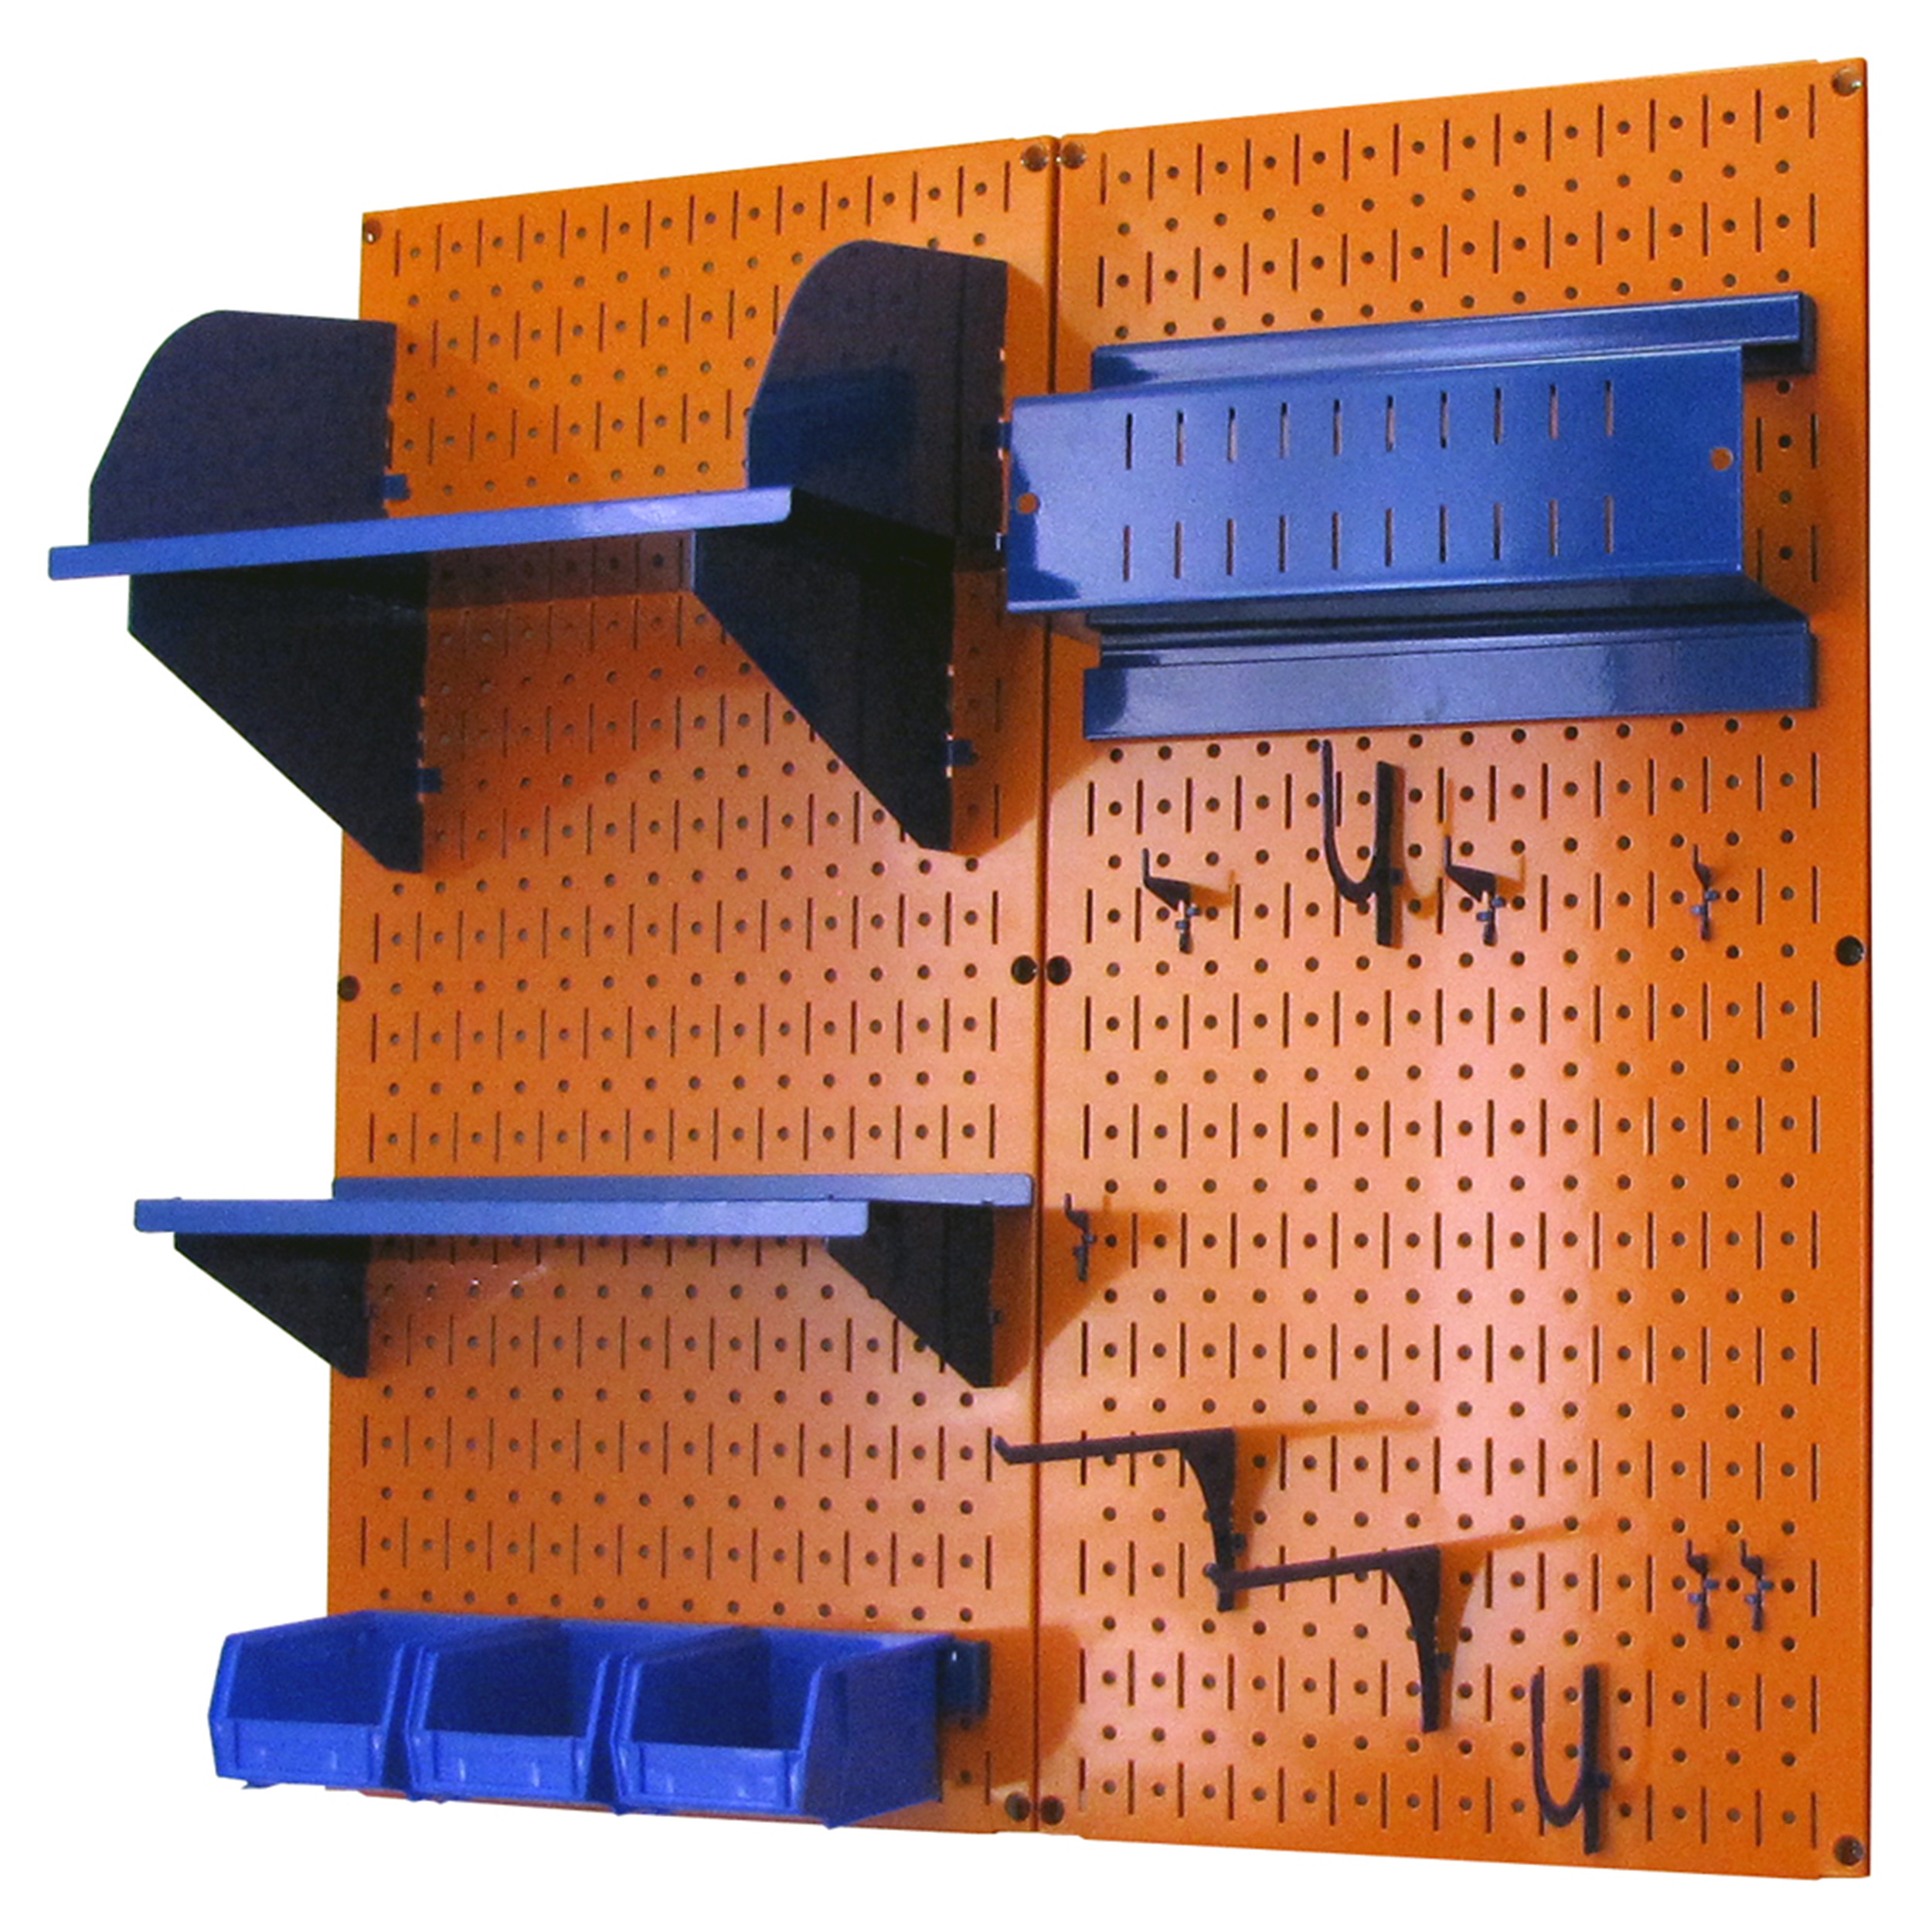 Pegboard Hobby Craft Pegboard Organizer Storage Kit With Orange Pegboard And Blue Accessories